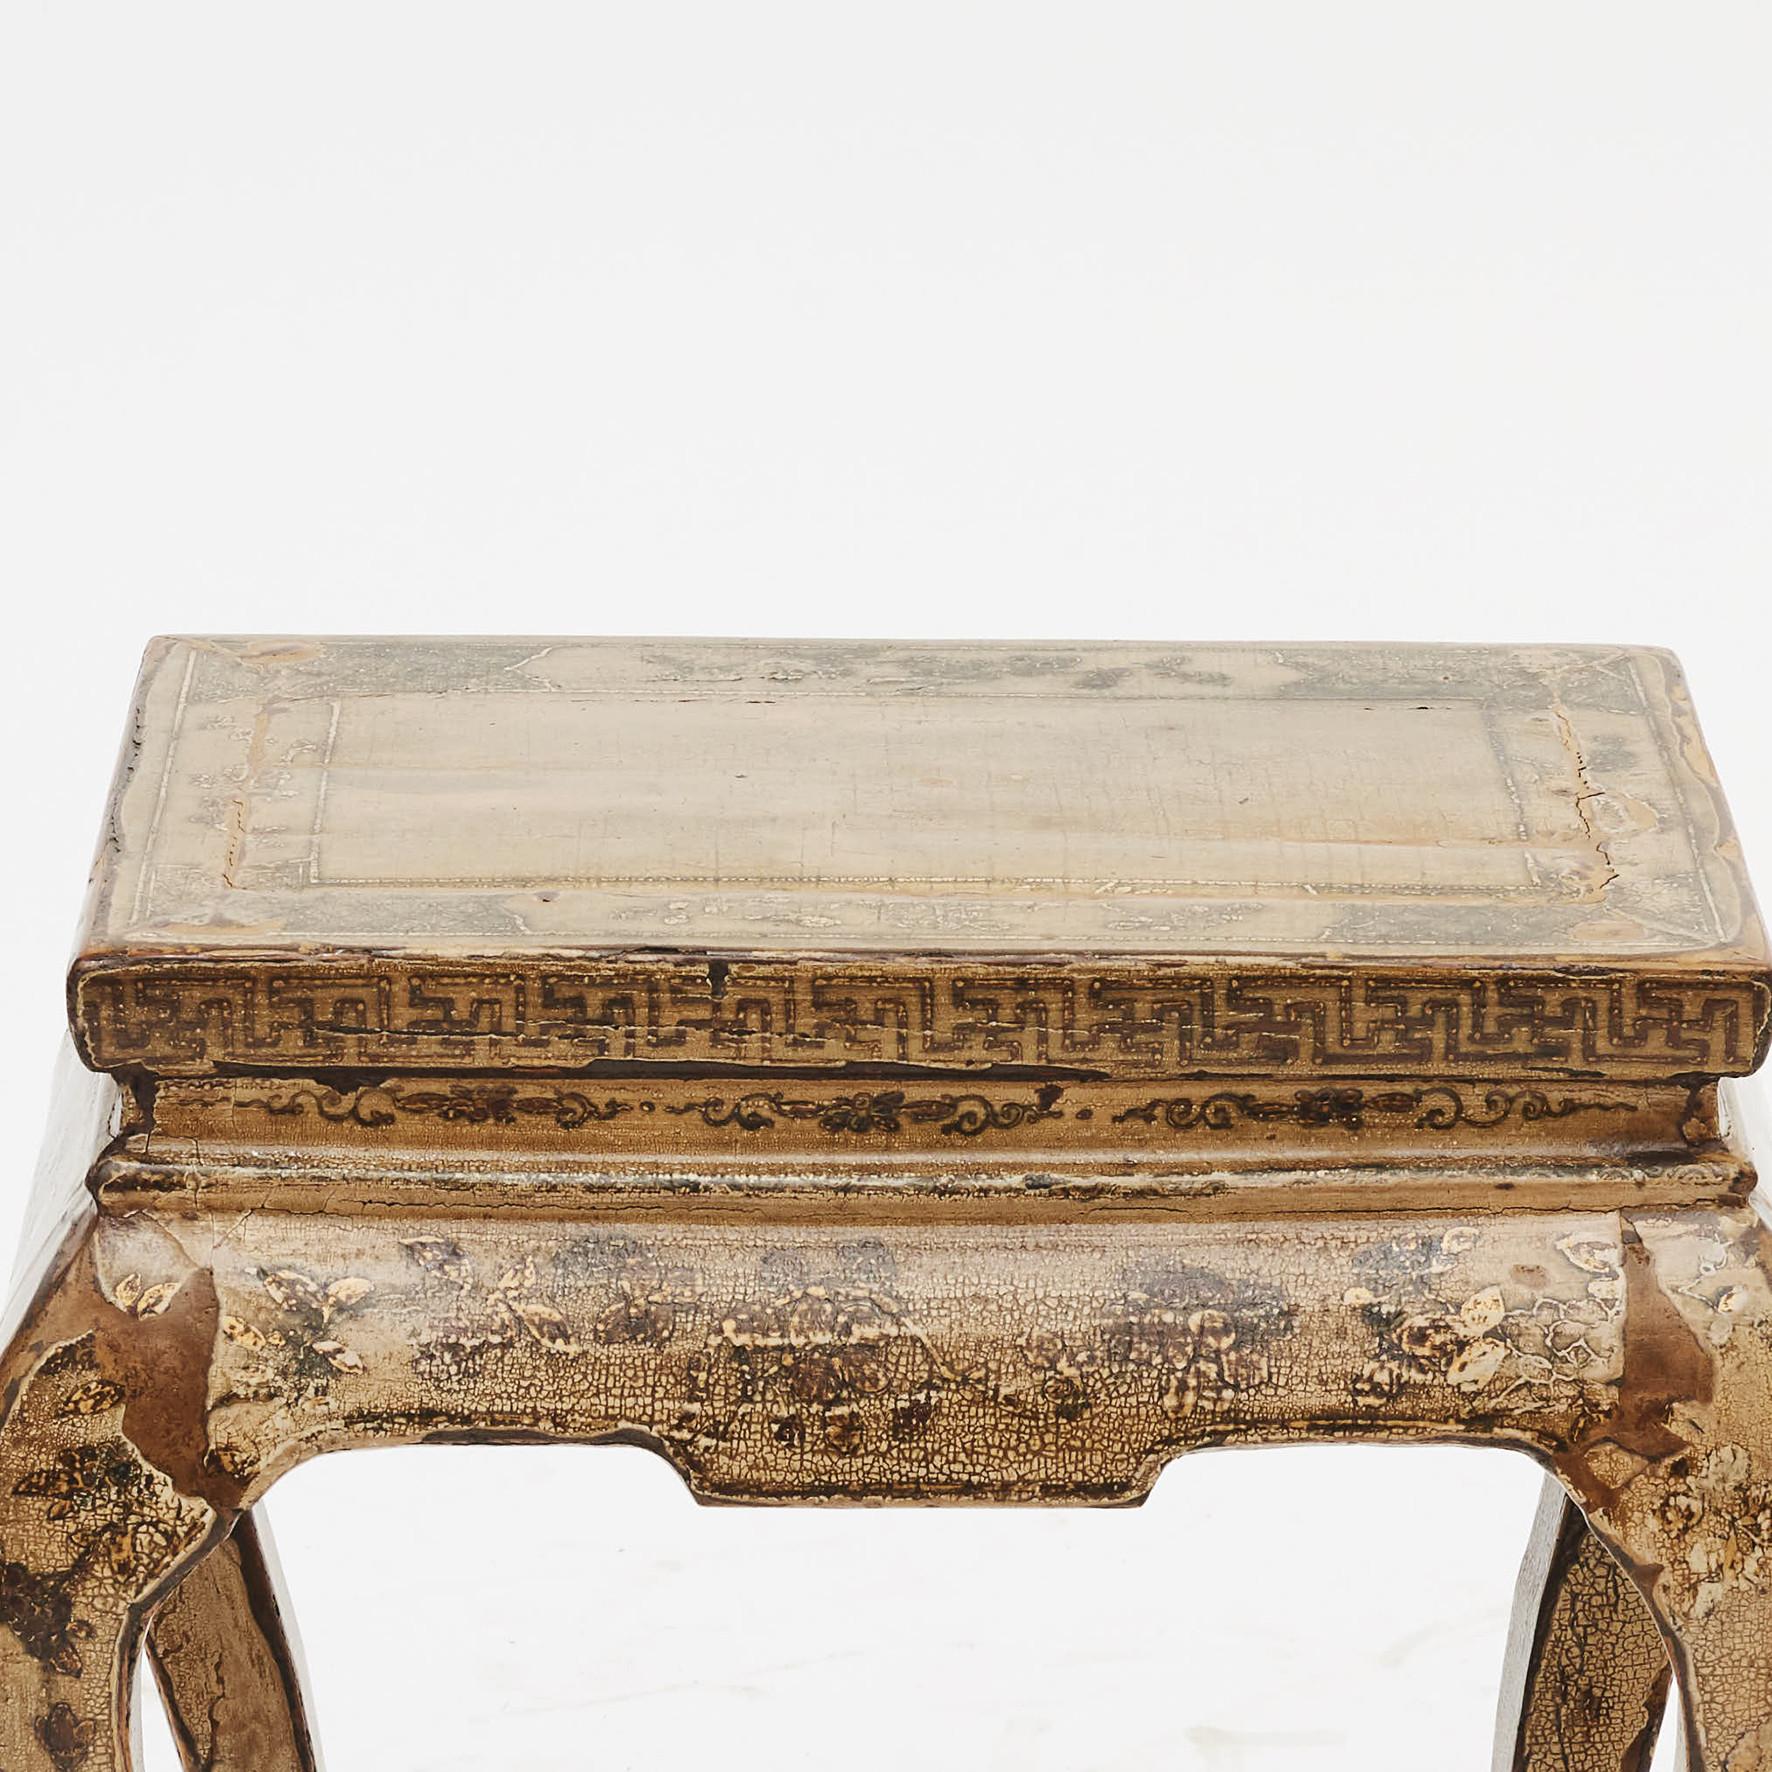 A charming stool with original vanilla-colored lacquer and remnants of decorations. Beautiful age-related patina, China, circa 1900.
Provenance: Wava Kitty Countess Armfelt, personal friend to Chamberlaine and lady in waiting for HM Queen Margrethe